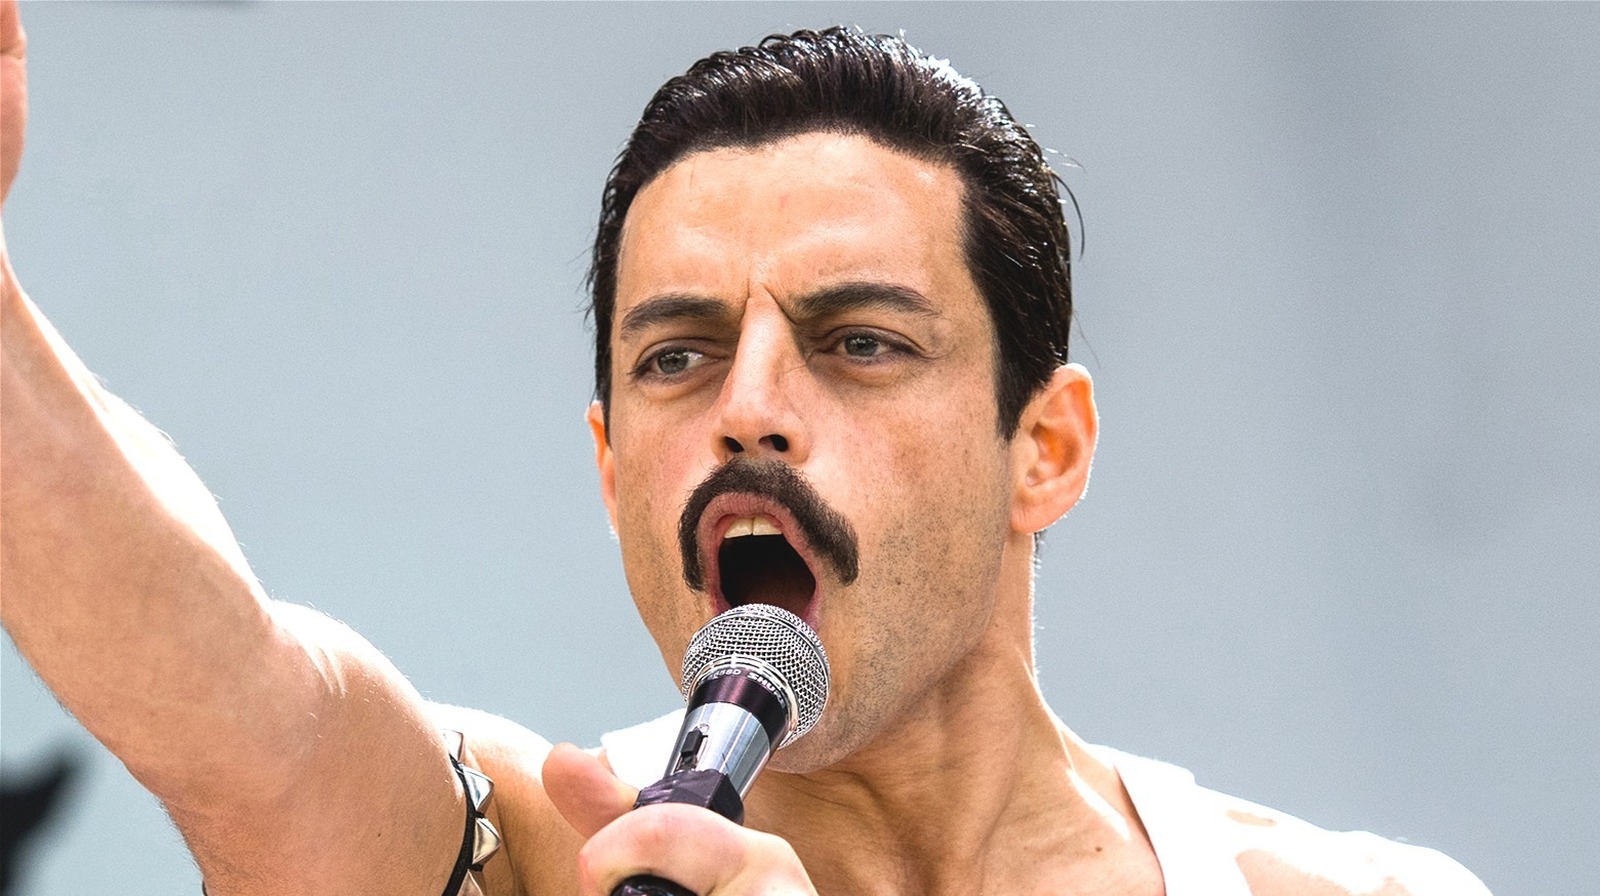 An open letter to the many fans of Bohemian Rhapsody from a concerned queer